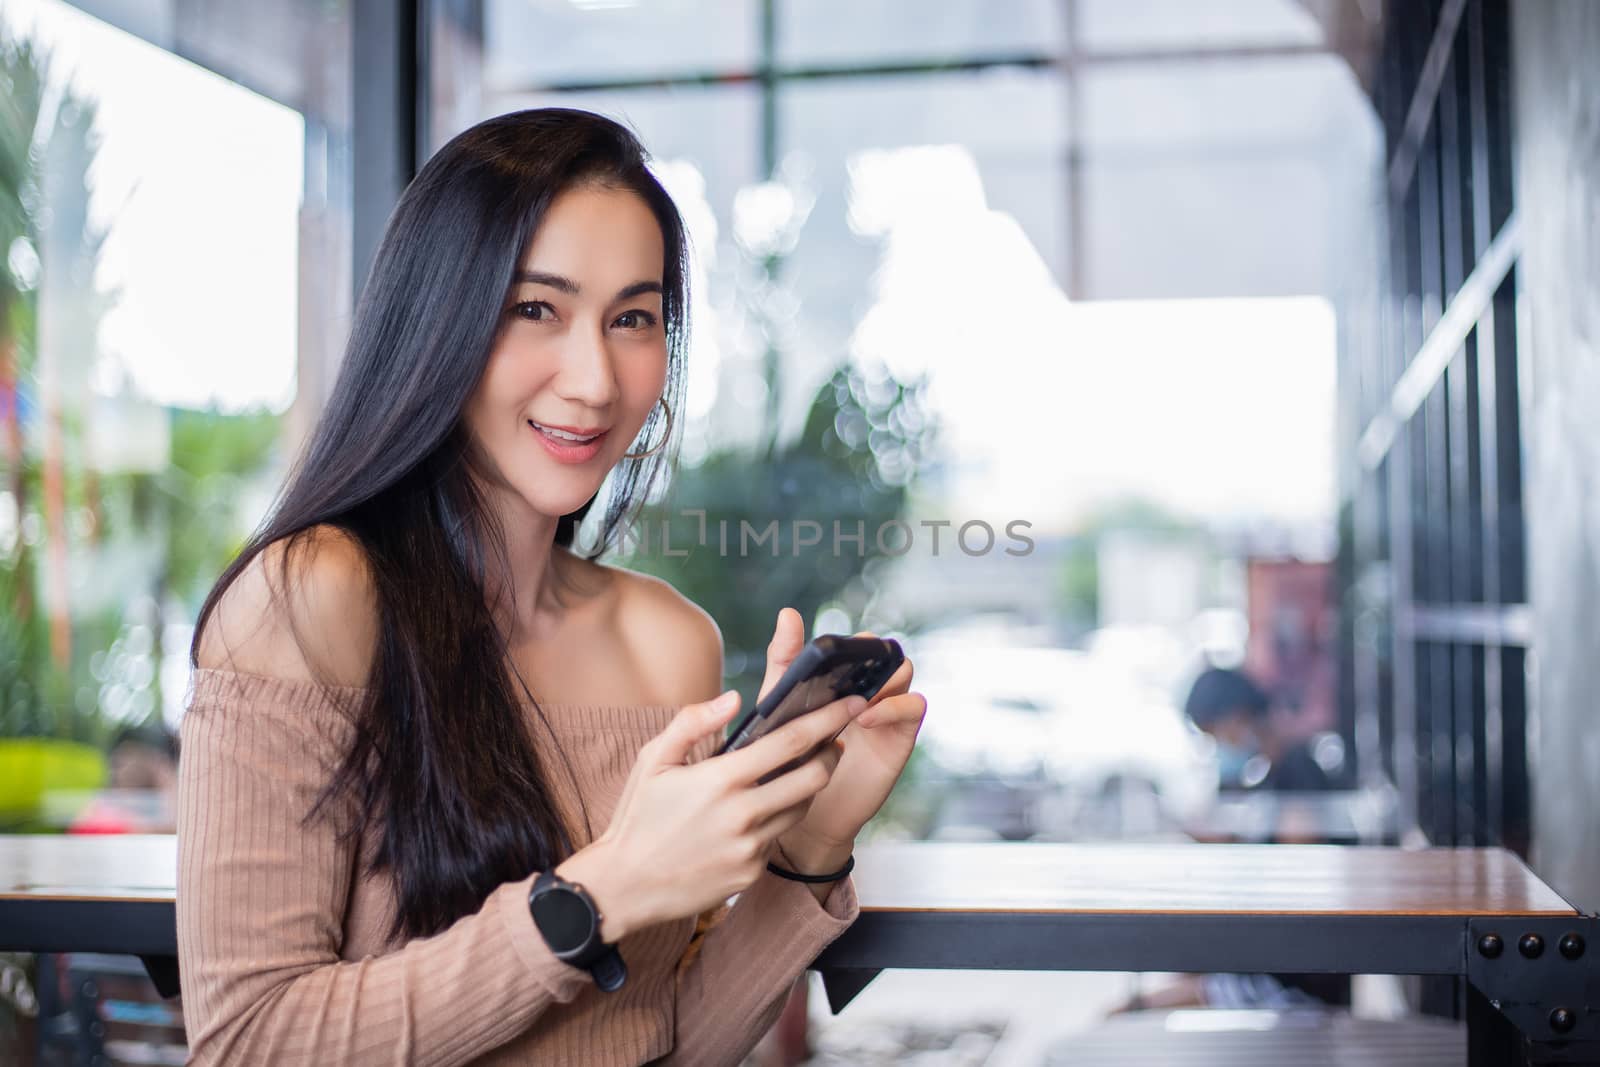 Smiling and happy Asian Business women are using mobile and touch smart phone for Communication and search for information .Technology communication lifestyles concept. by Tuiphotoengineer